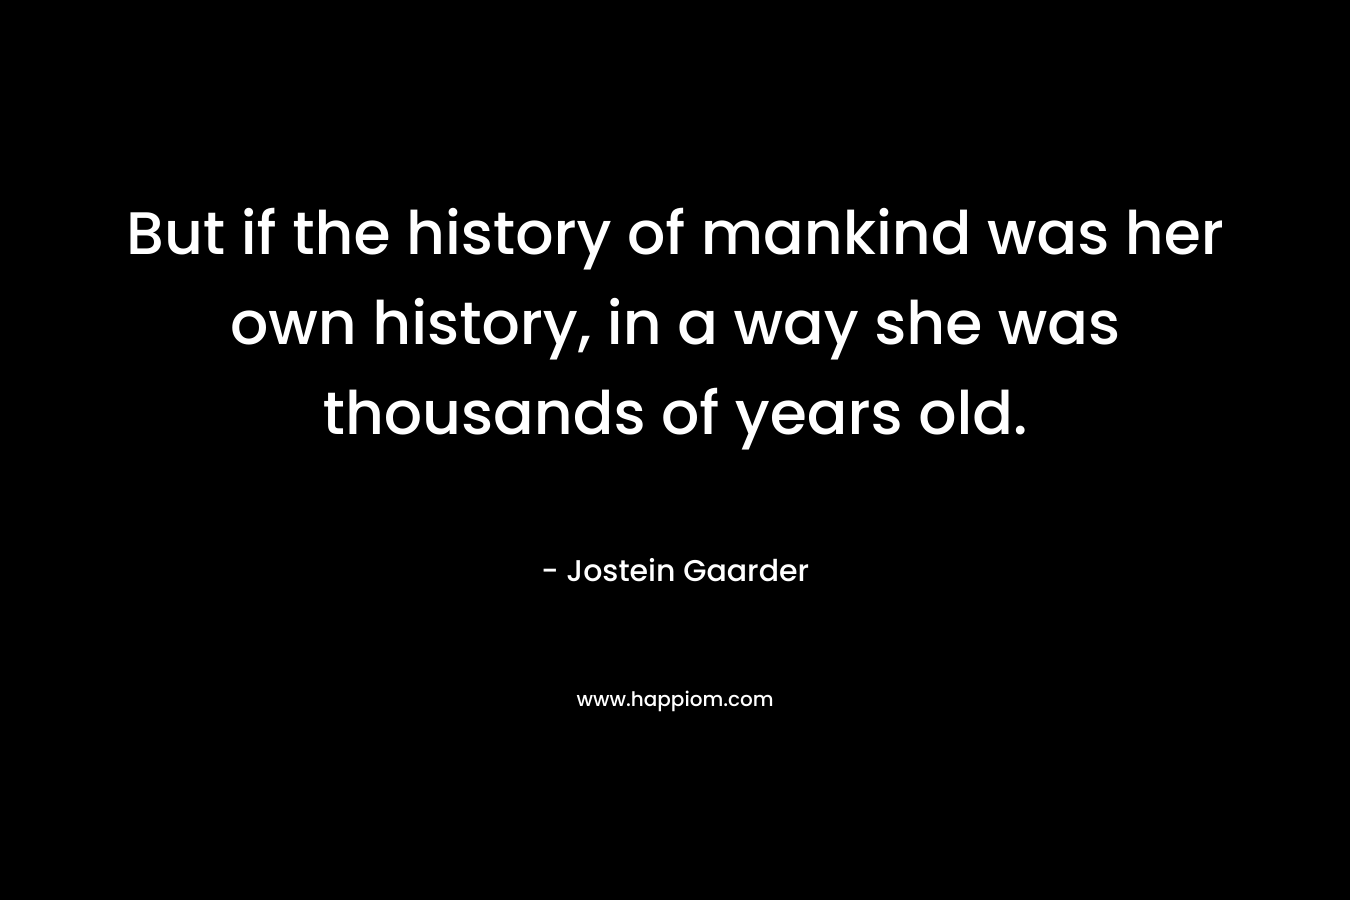 But if the history of mankind was her own history, in a way she was thousands of years old.